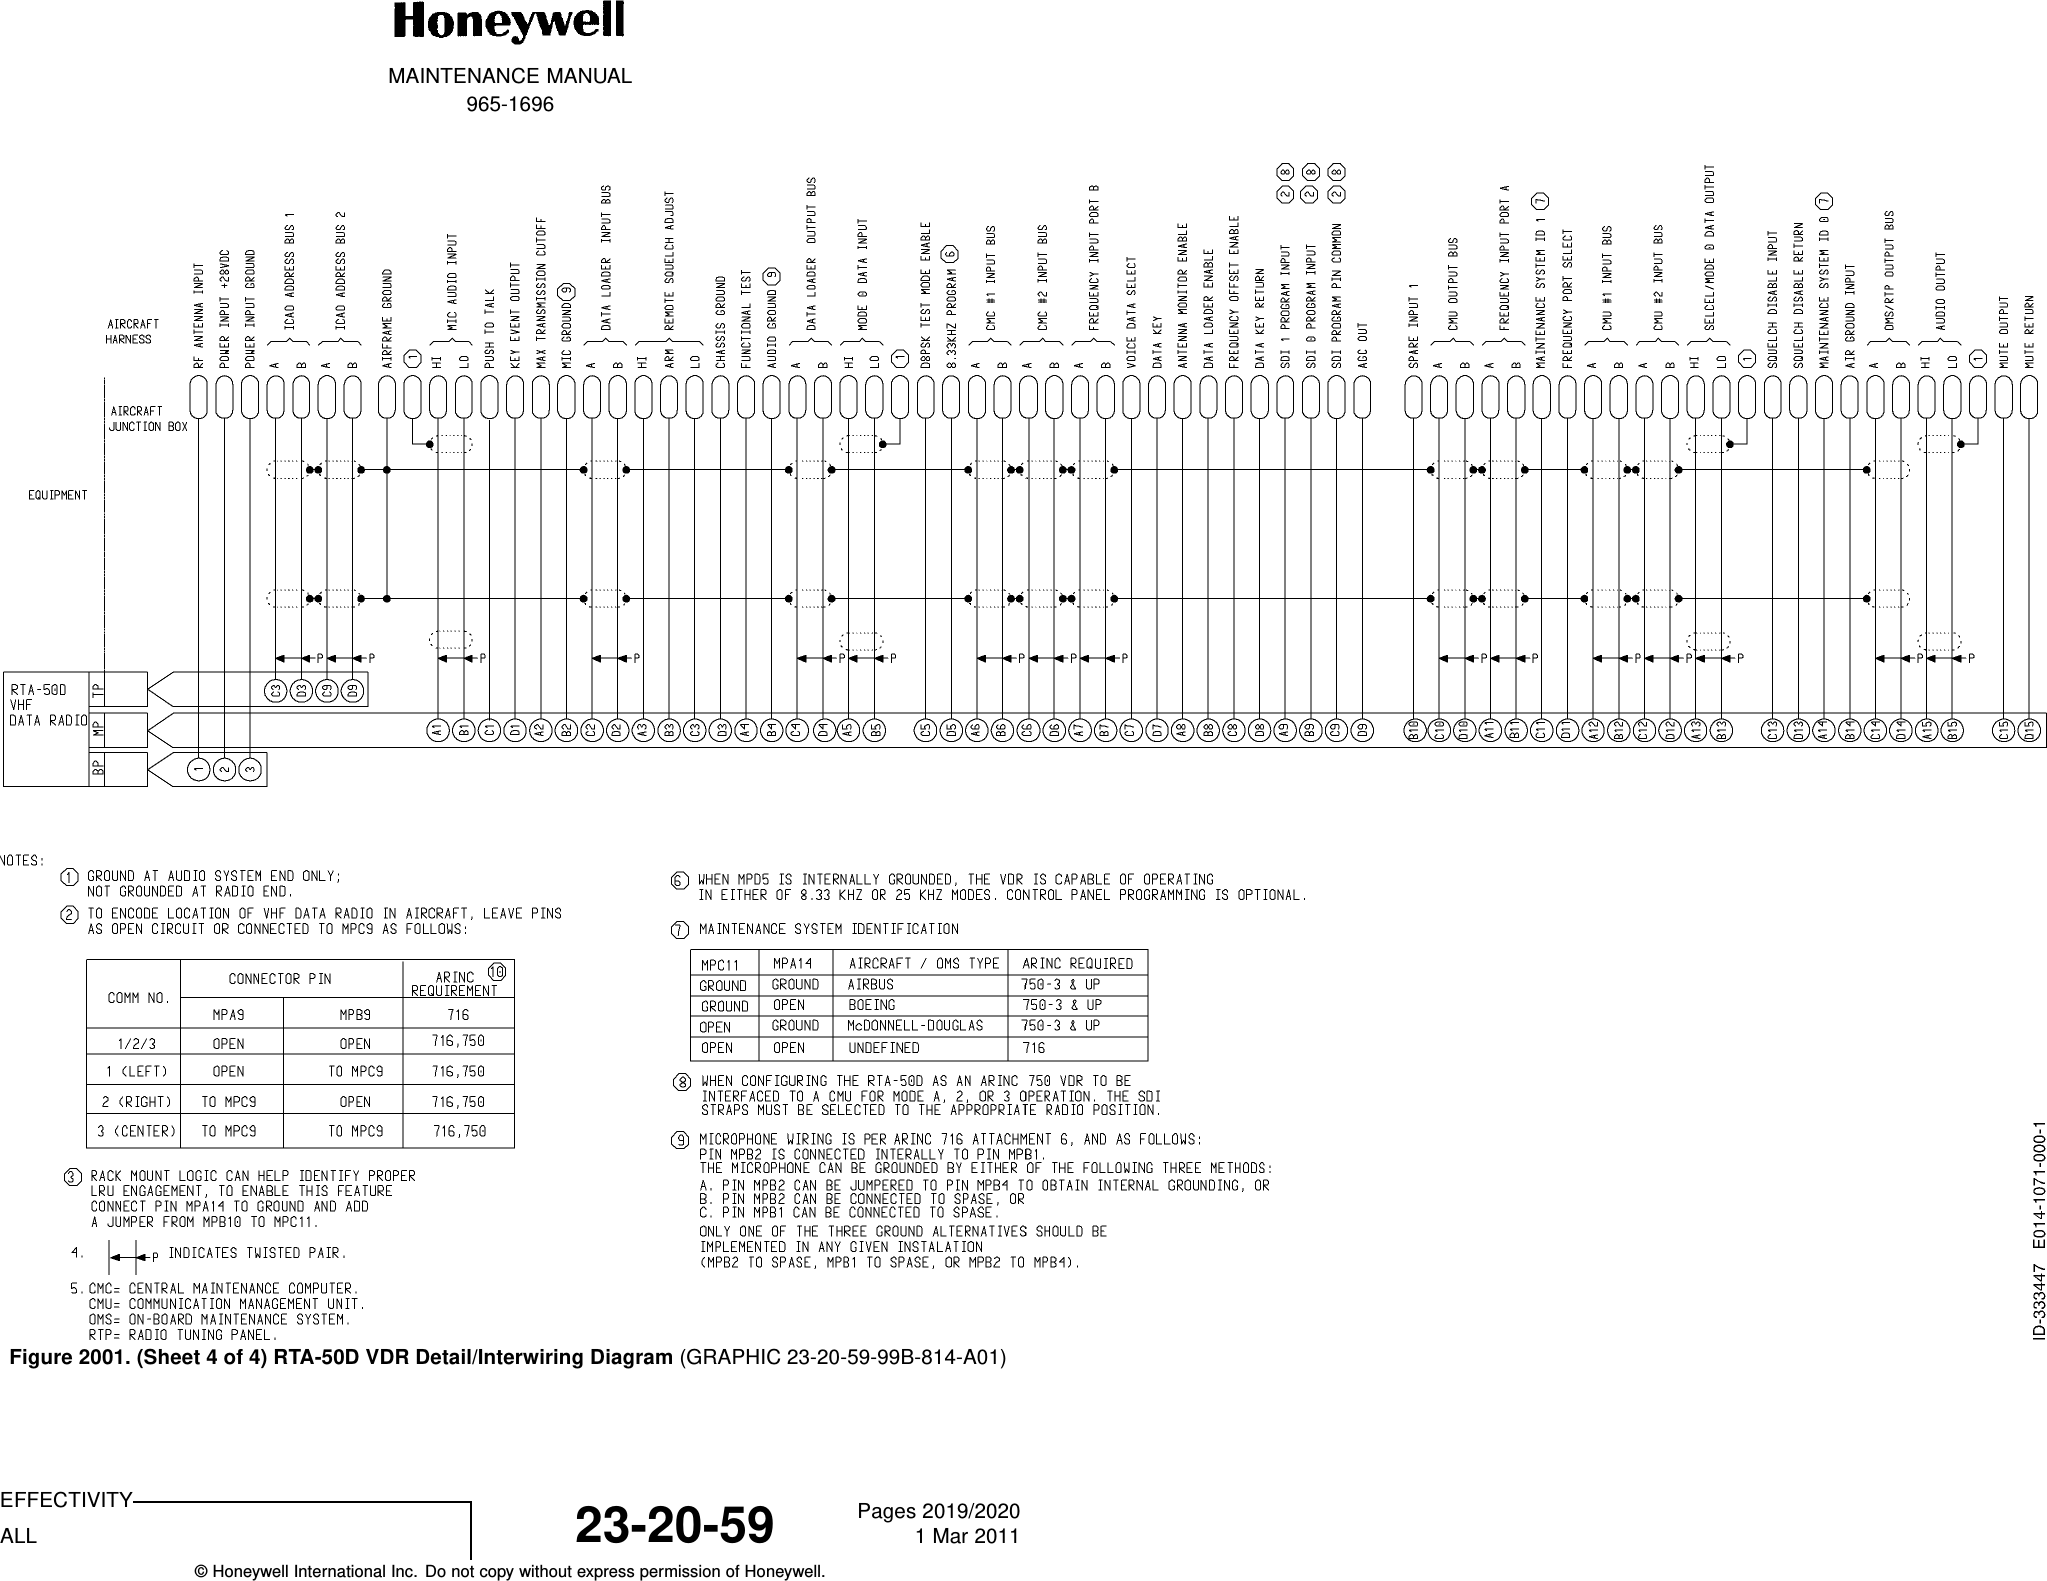 MAINTENANCE MANUAL965-1696Figure 2001. (Sheet 4 of 4) RTA-50D VDR Detail/Interwiring Diagram (GRAPHIC 23-20-59-99B-814-A01)EFFECTIVITYALL 23-20-59 Pages 2019/20201 Mar 2011© Honeywell International Inc. Do not copy without express permission of Honeywell.